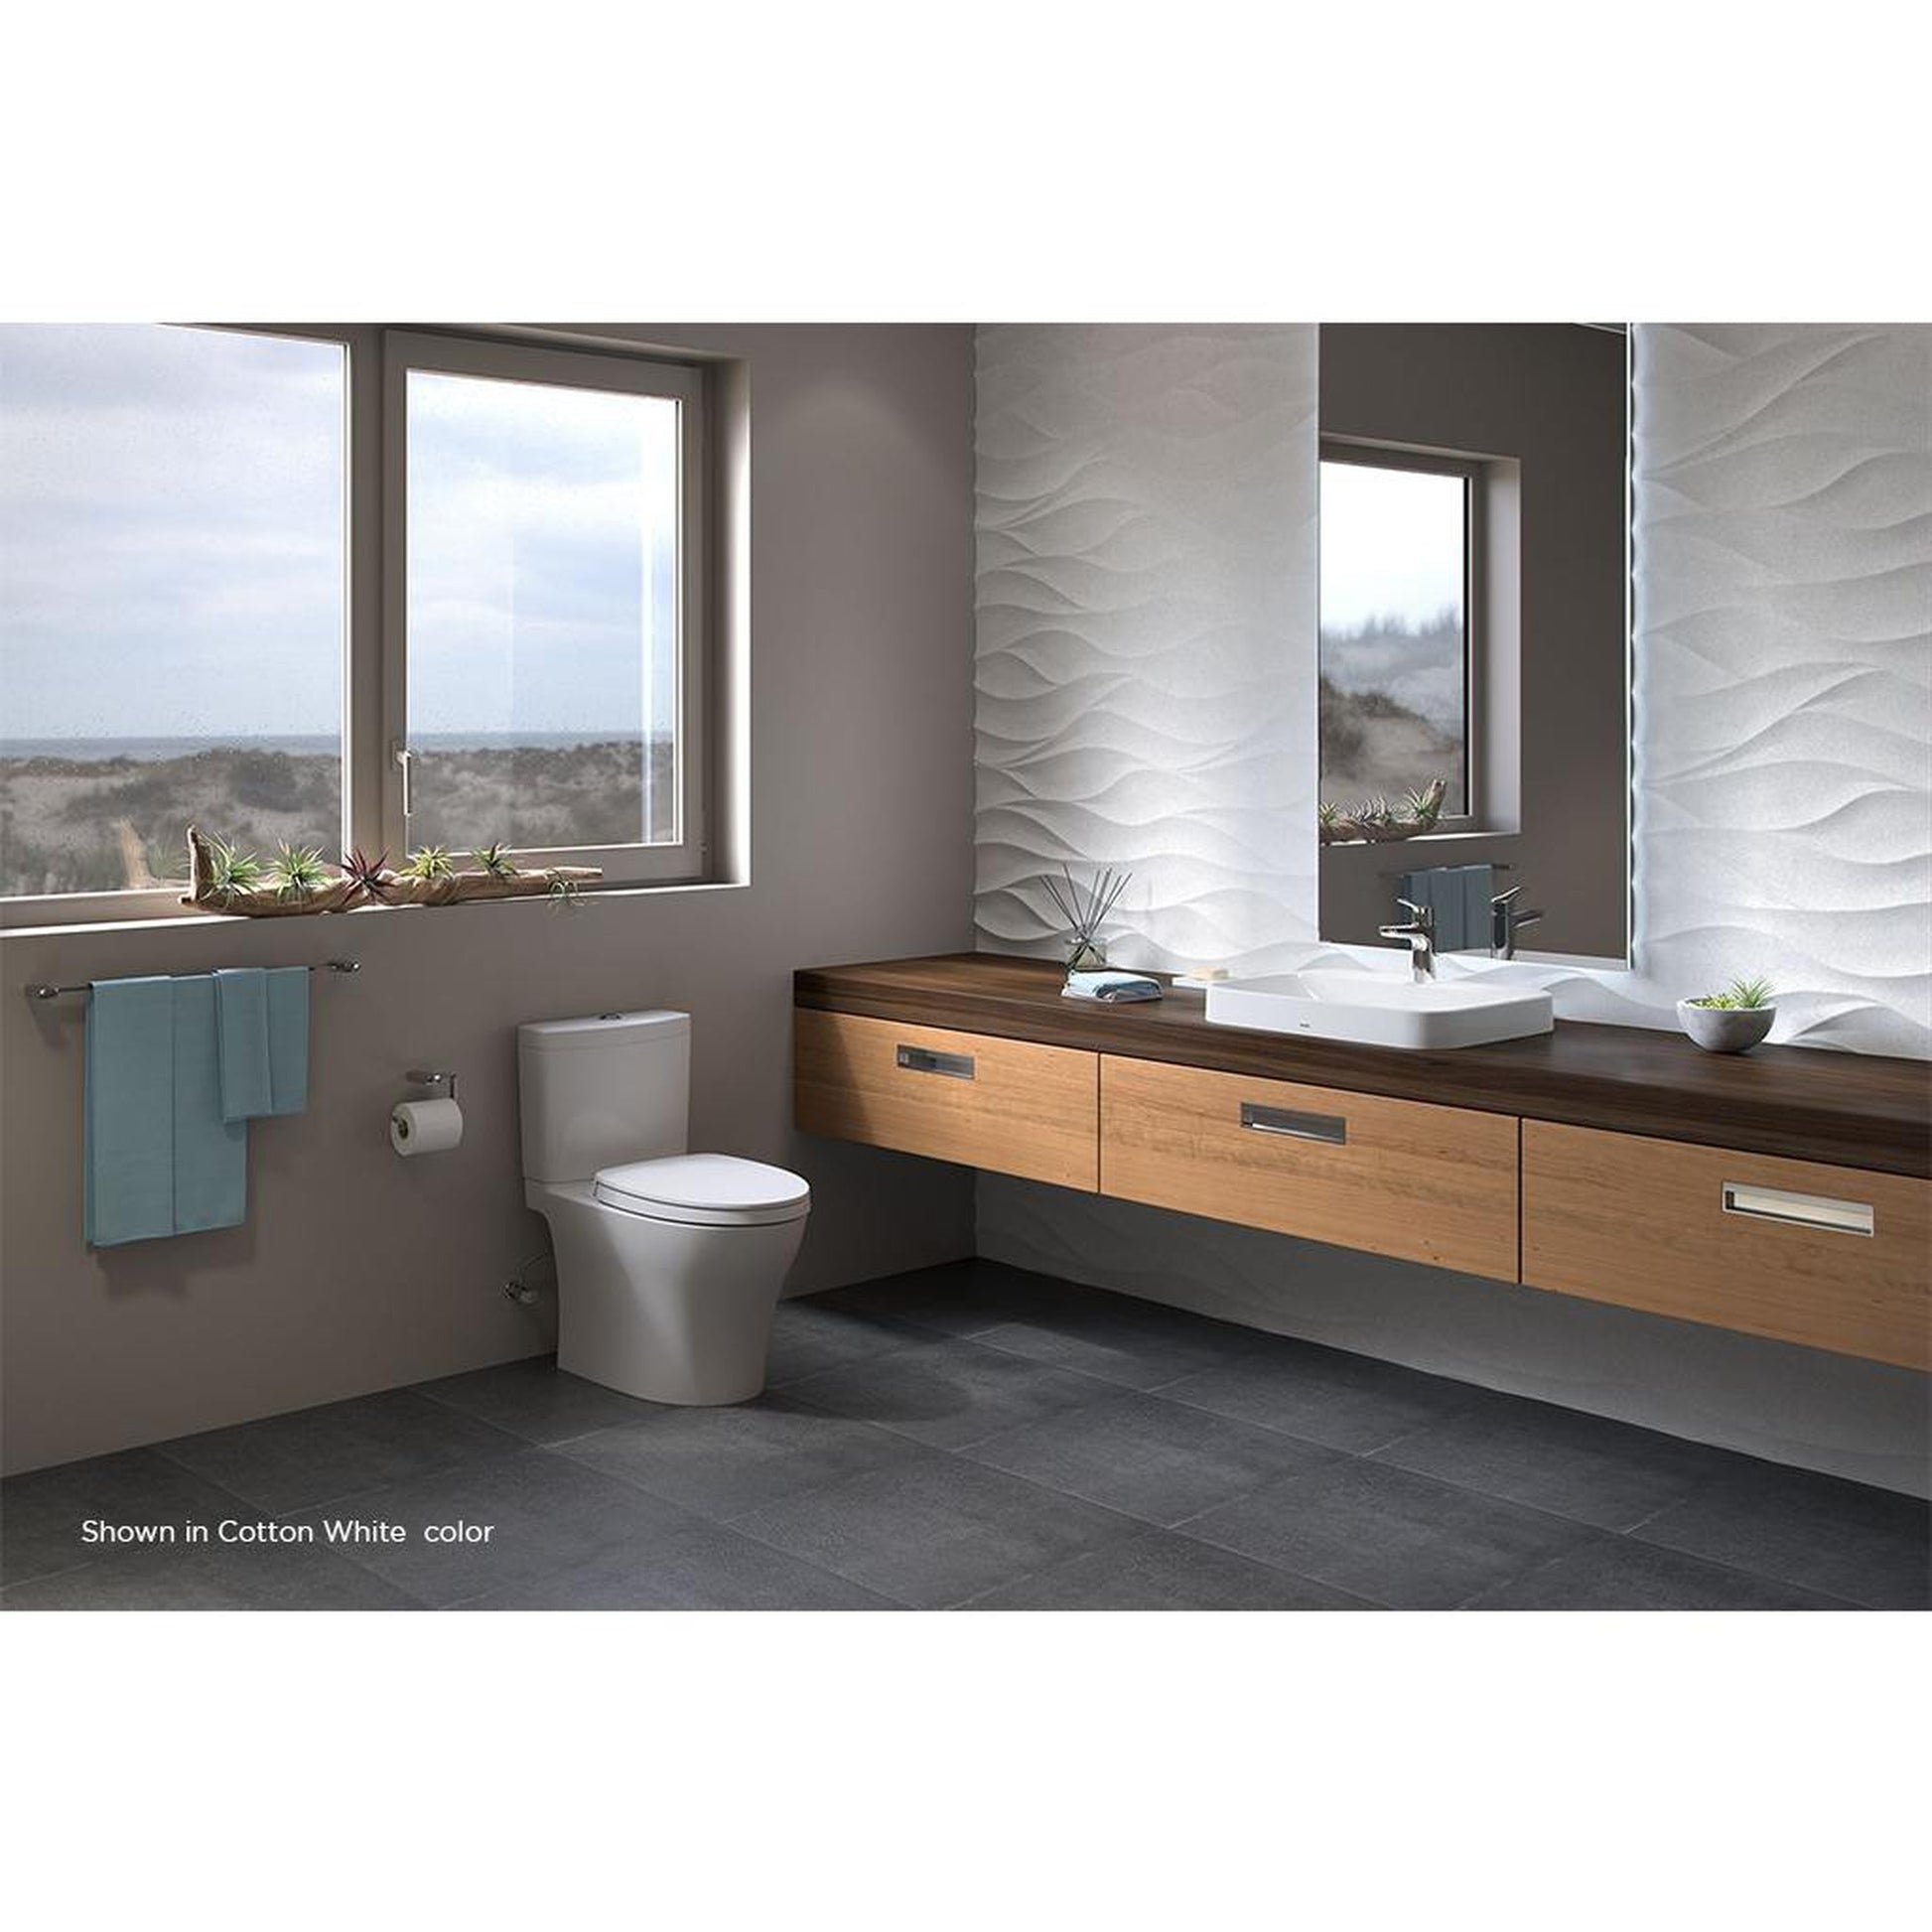 TOTO Aquia IV Cotton White 1.0 GPF & 0.8 GPF Dual-Flush Two-Piece Elongated Toilet With WASHLET+ Connection - SoftClose Seat Included